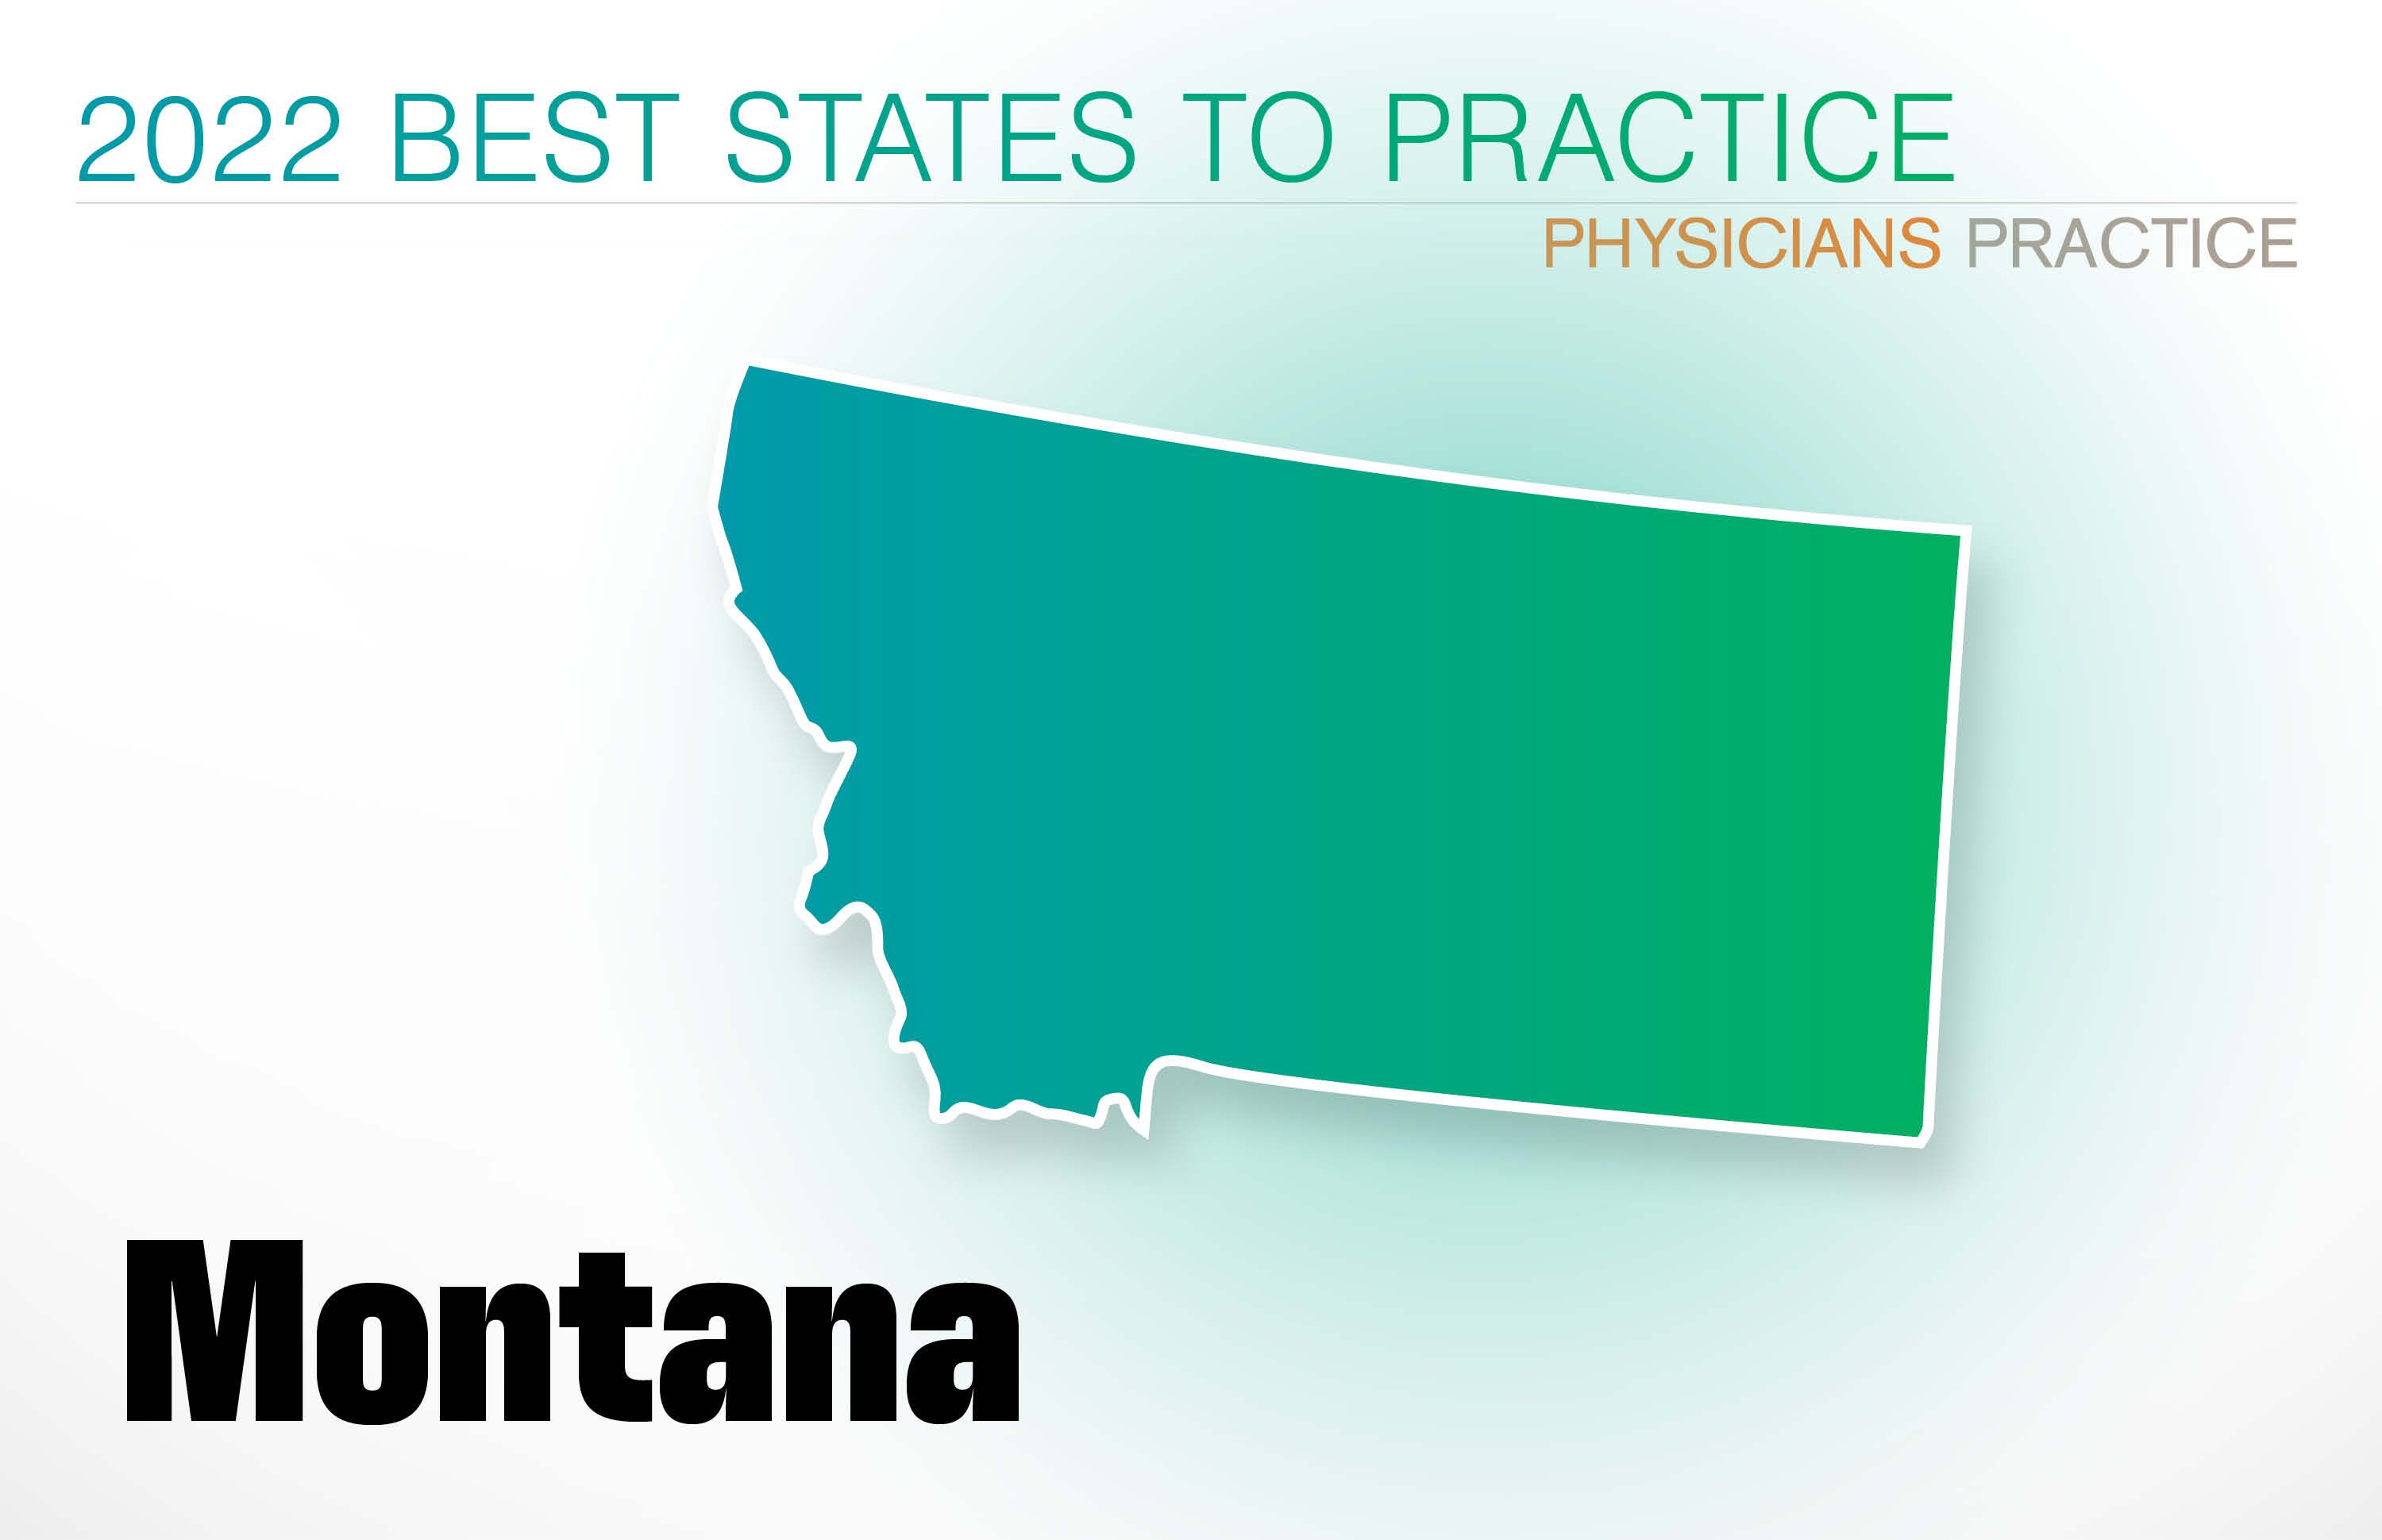 #22 Montana Rankings: Cost of living: 34 Physician density: 21 Amount of state business taxes collected: 5 Average malpractice insurance rates: 33 Quality of life: 7 GPCI: 34